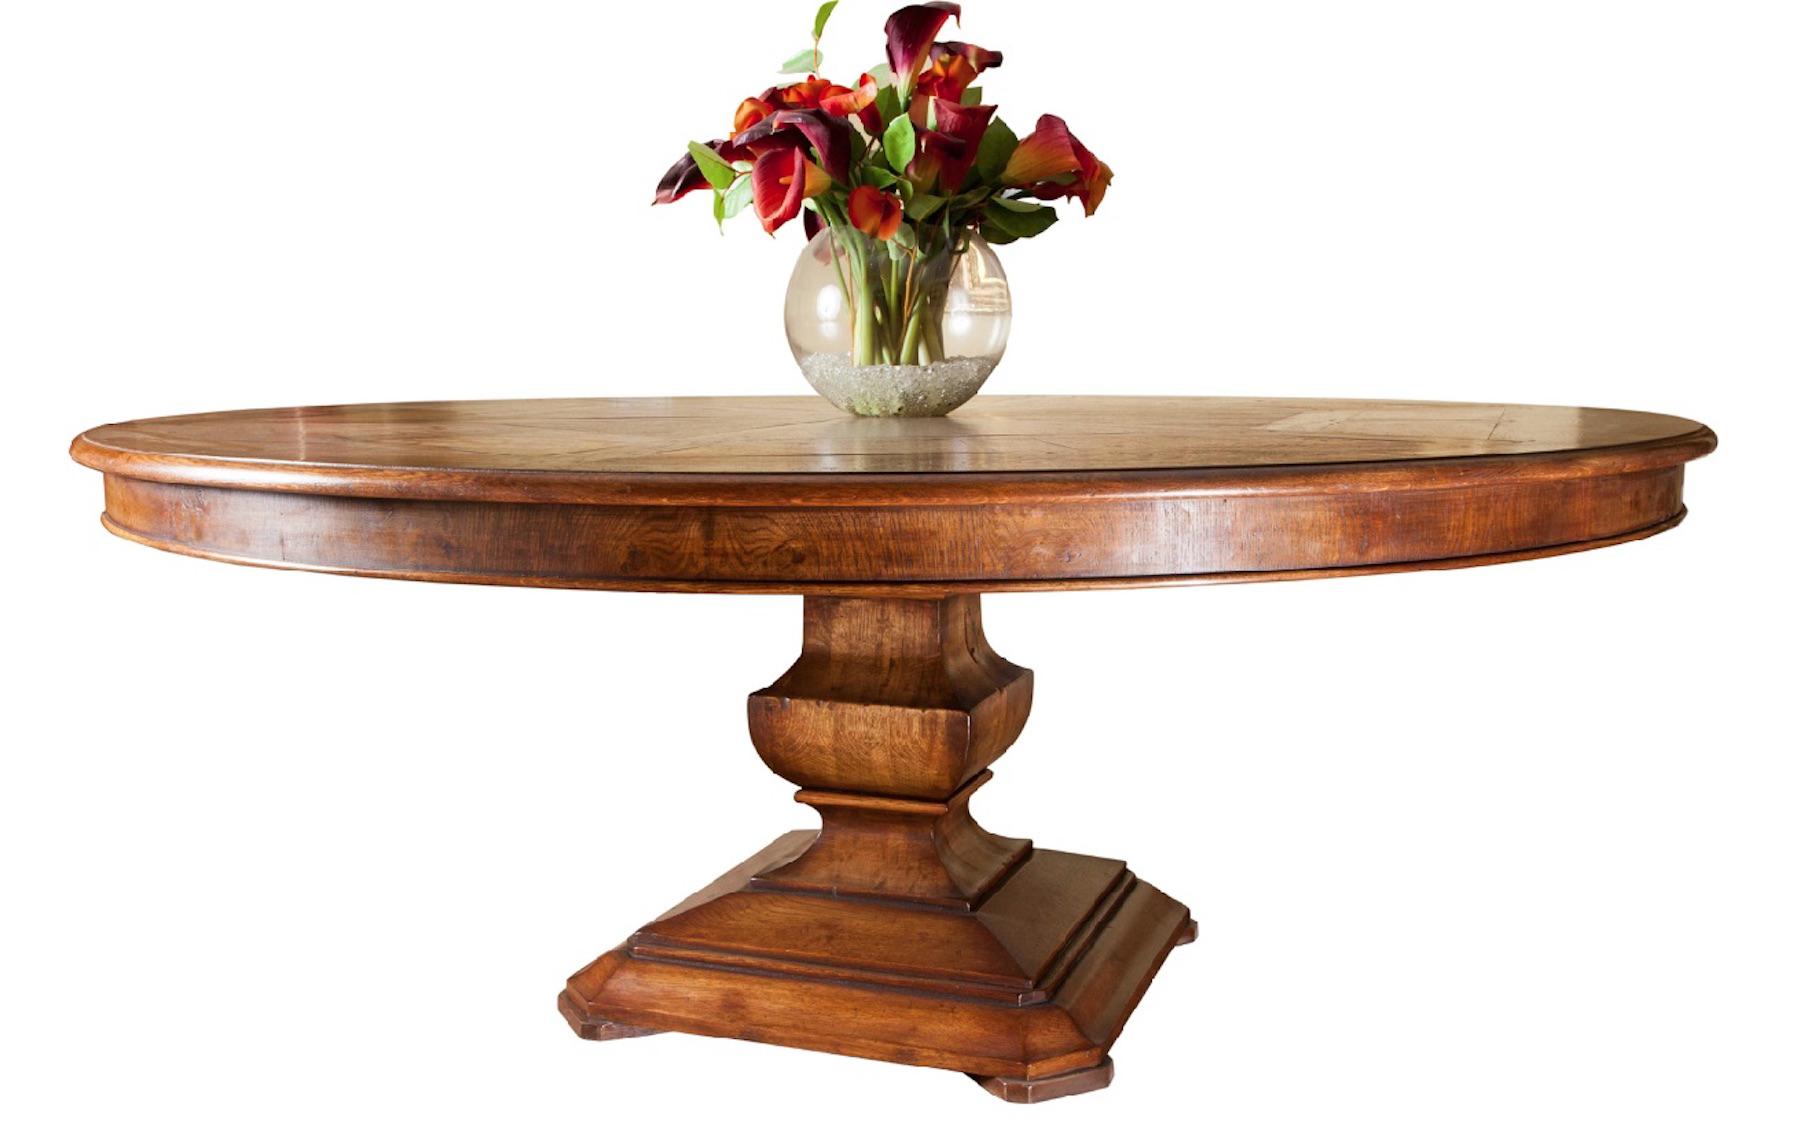 Handmade circular dining table, superb quality (made in the UK by Garners). The hexagonal segmented oak and burr oak panelled top sits on a contemporary platform column base. Seats 8/10. 

Drawing from our lengthy experience in antique and fine